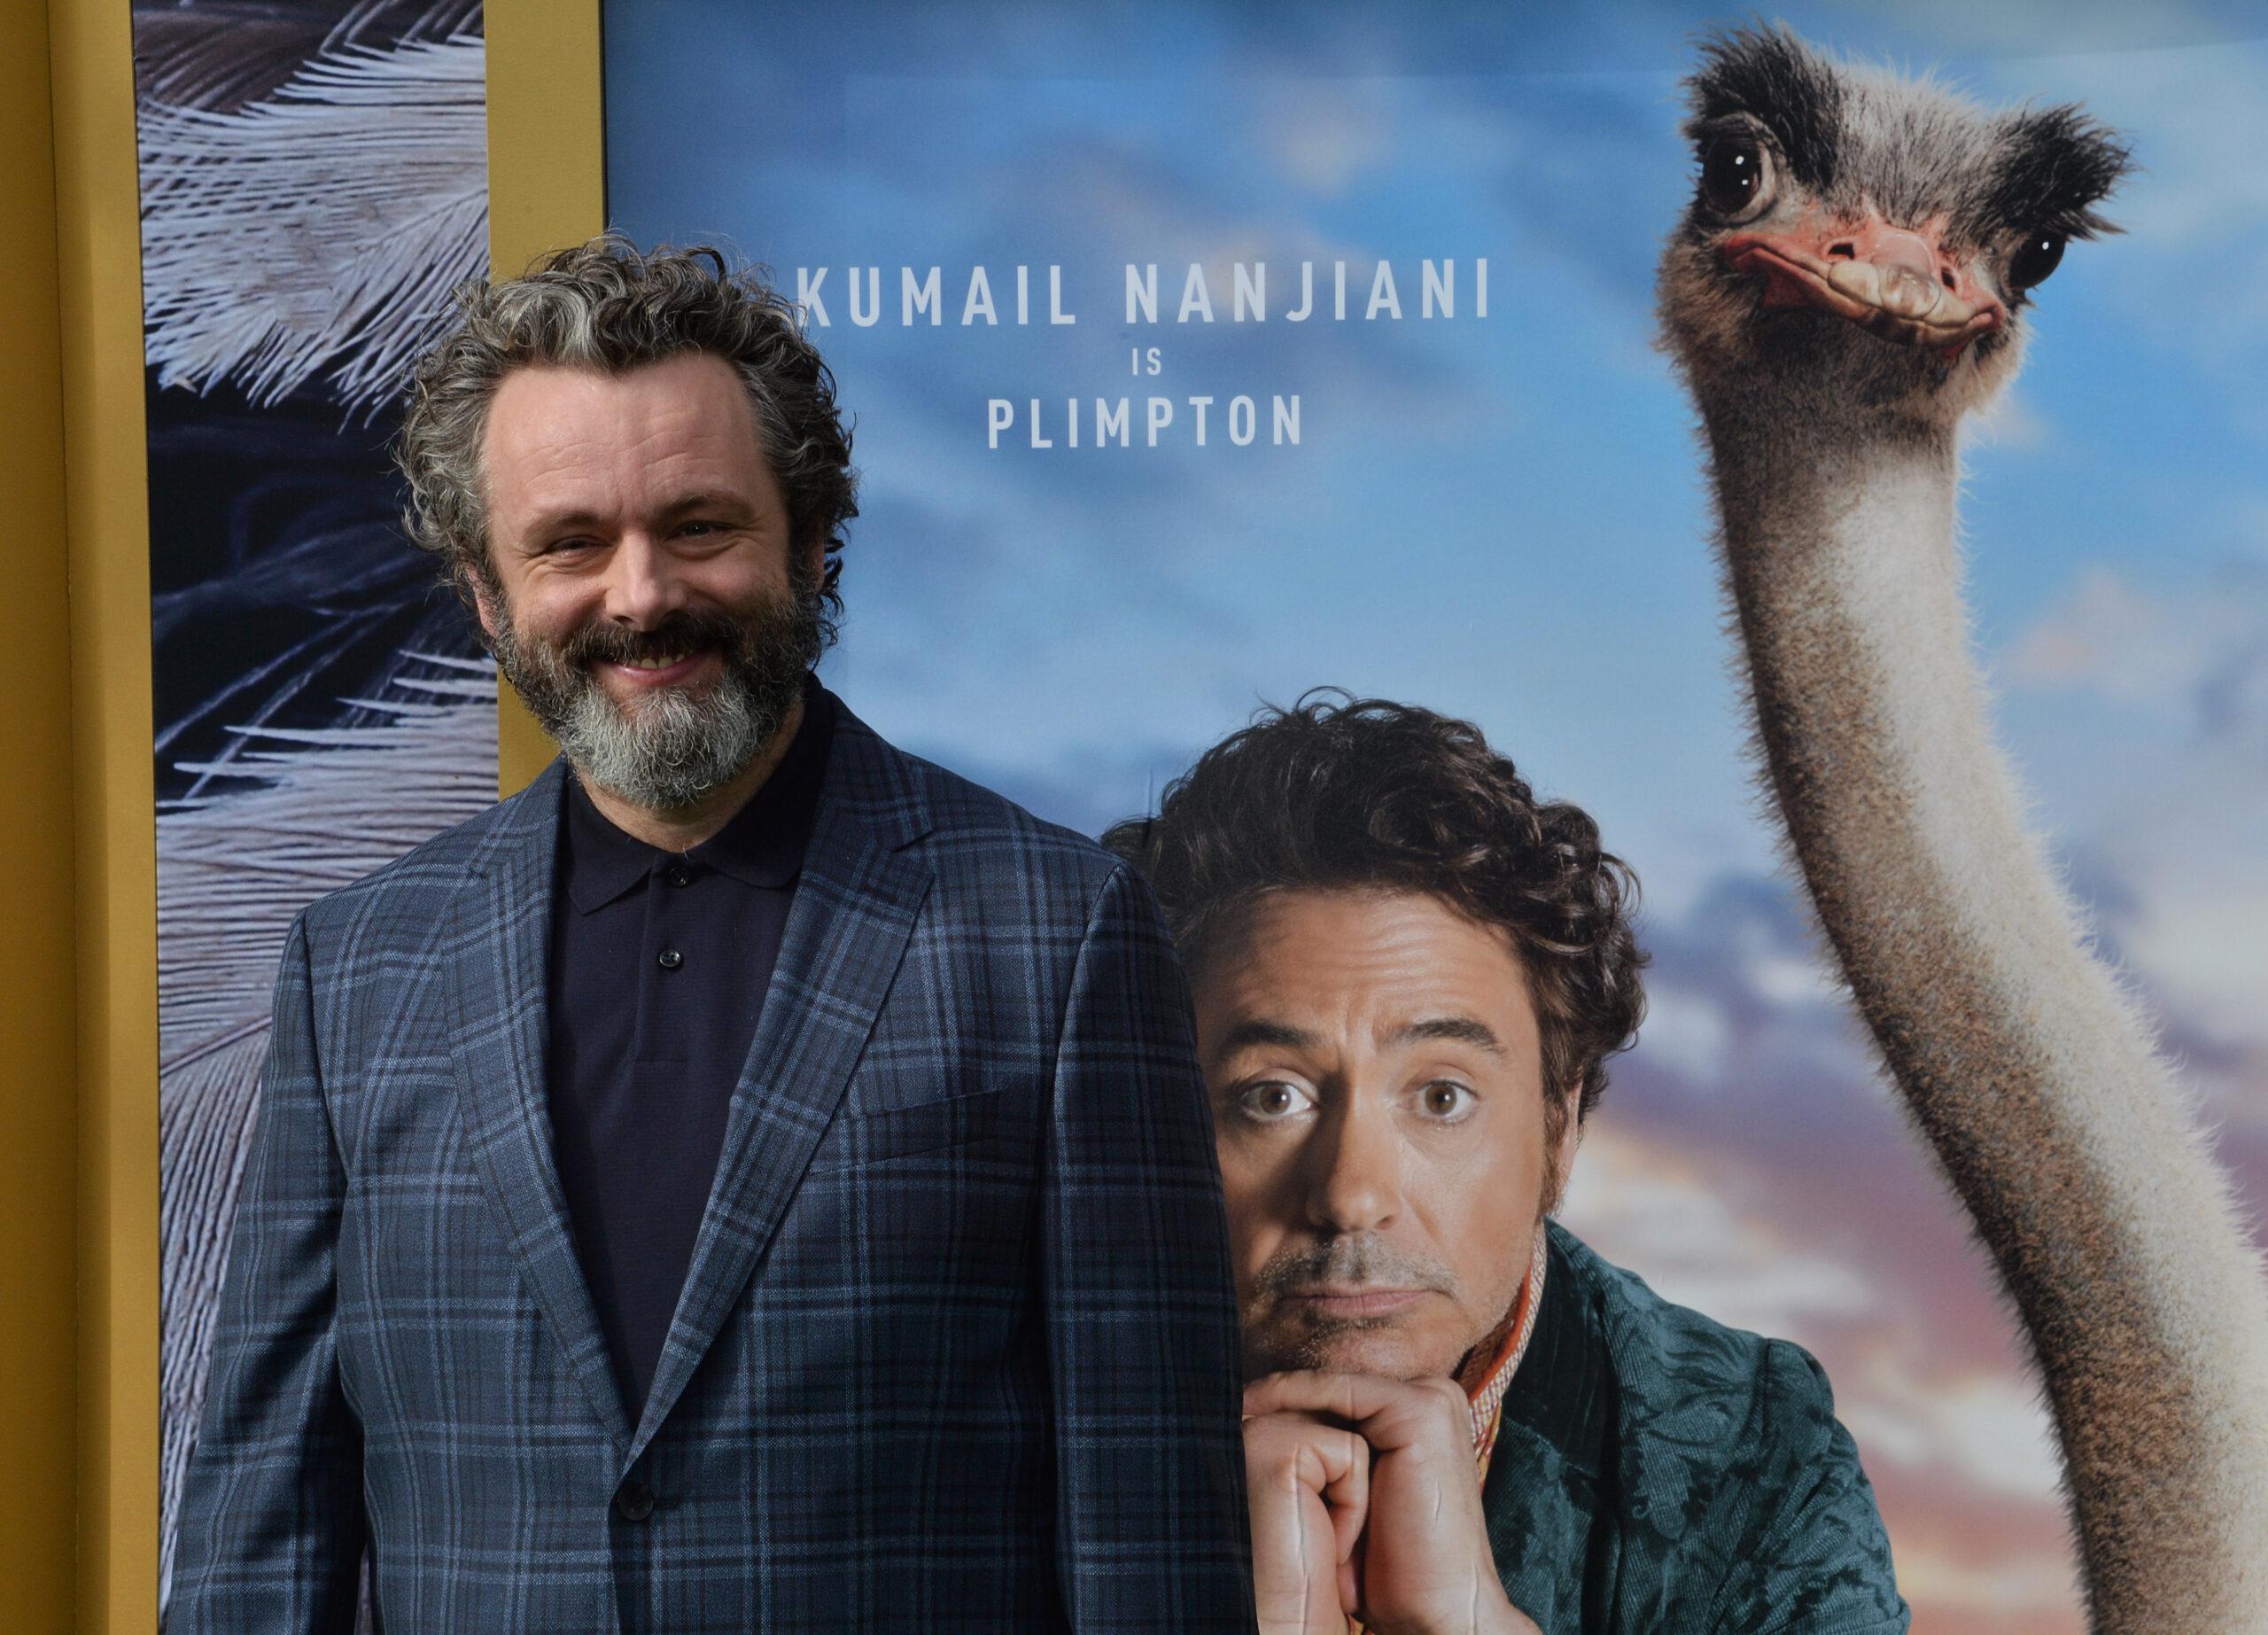 Michael Sheen attends the "Dolittle" premiere in Los Angeles